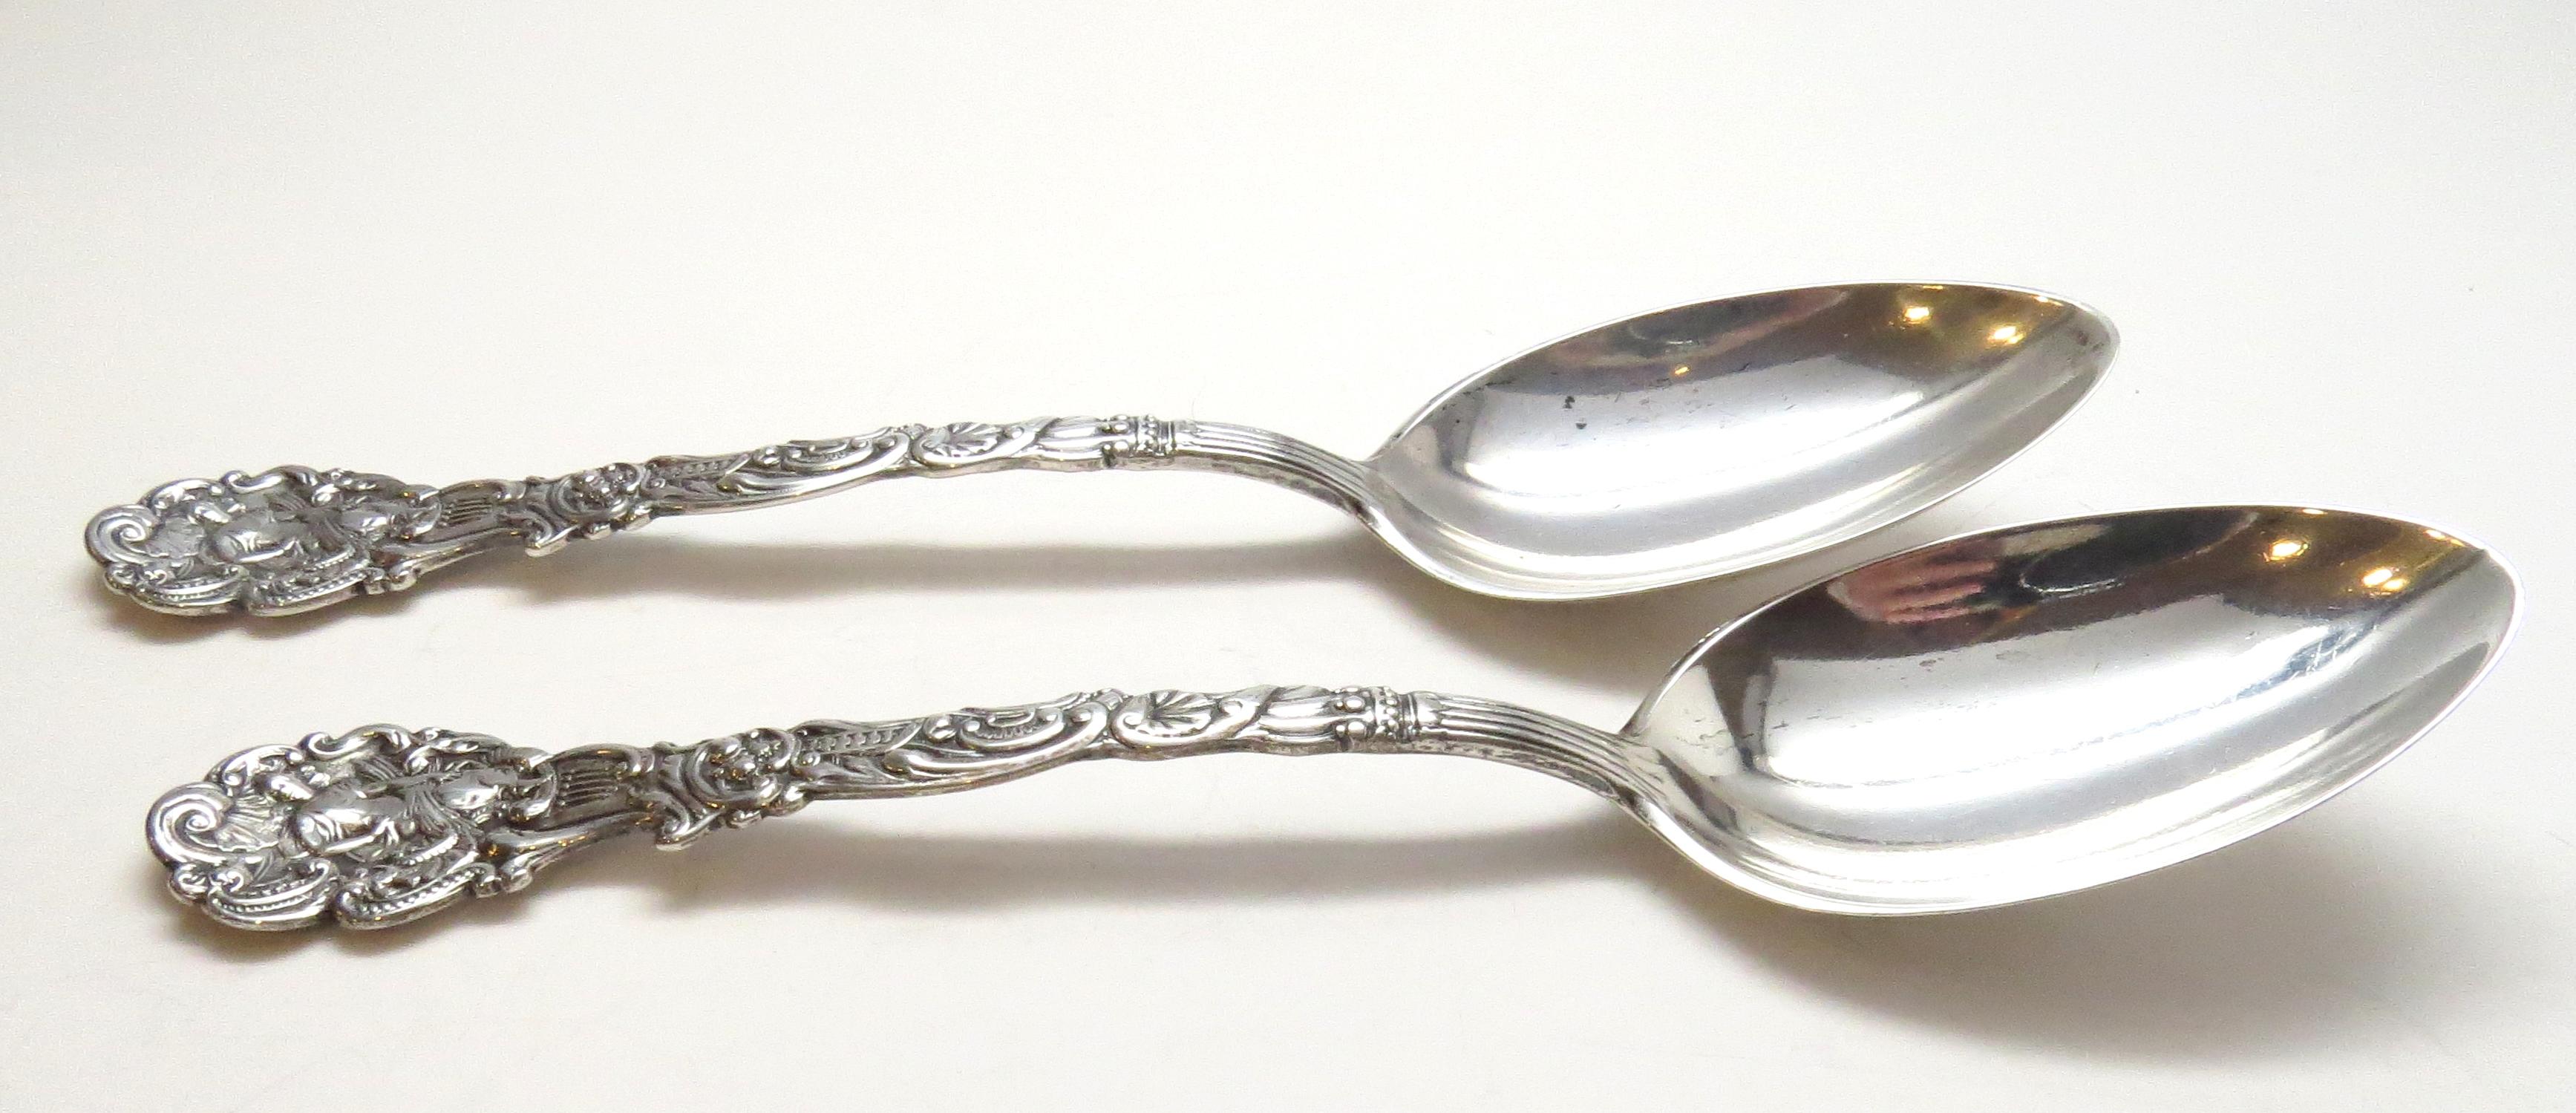 2 Gorham sterling silver table serving spoons in the Versailles pattern.
Marked: lion anchor G, STERLING COPYRIGHTED.
Monogram appears to be MG. Measures 8 1/2